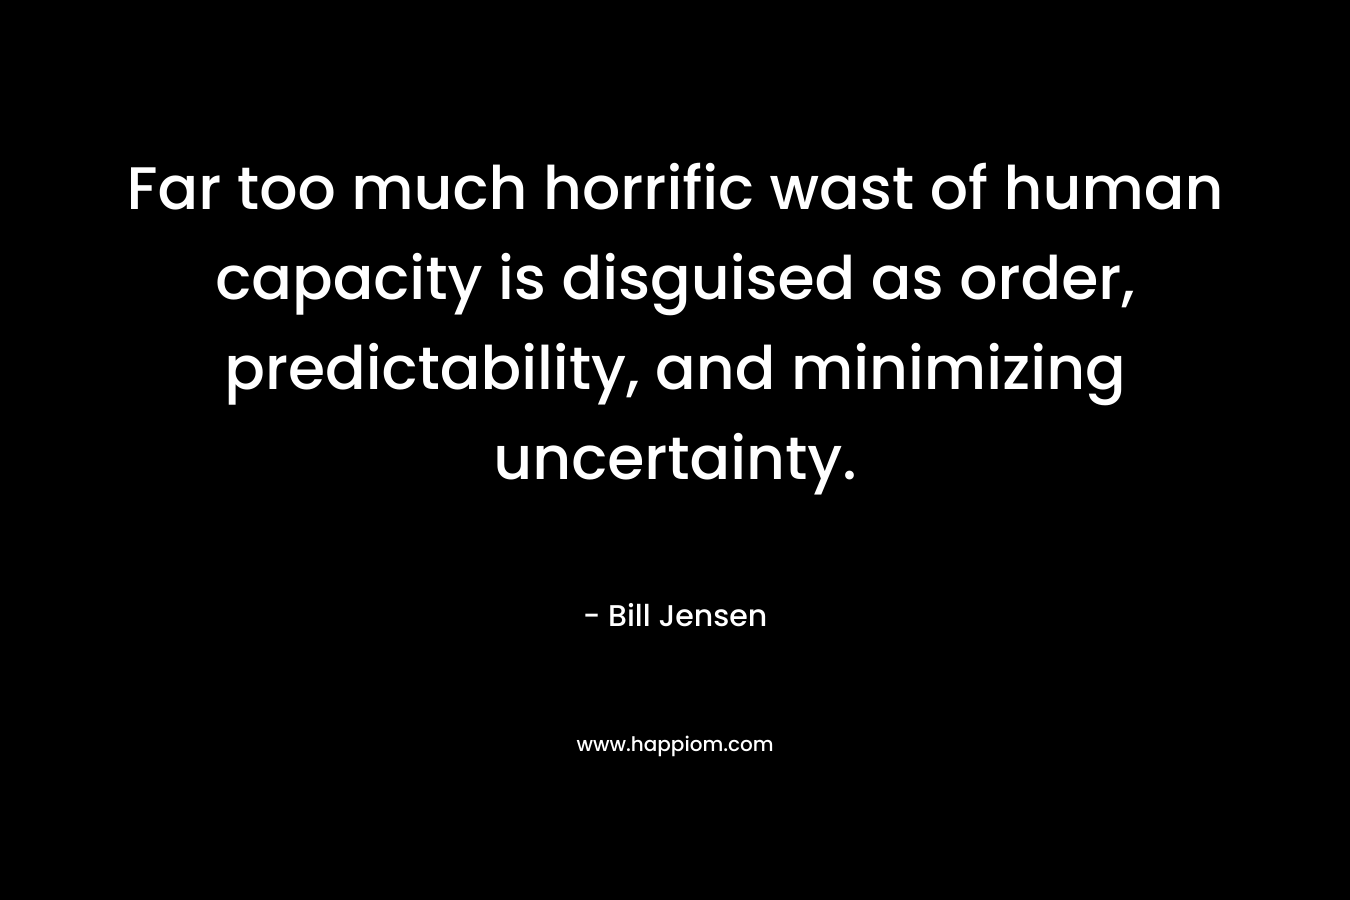 Far too much horrific wast of human capacity is disguised as order, predictability, and minimizing uncertainty.